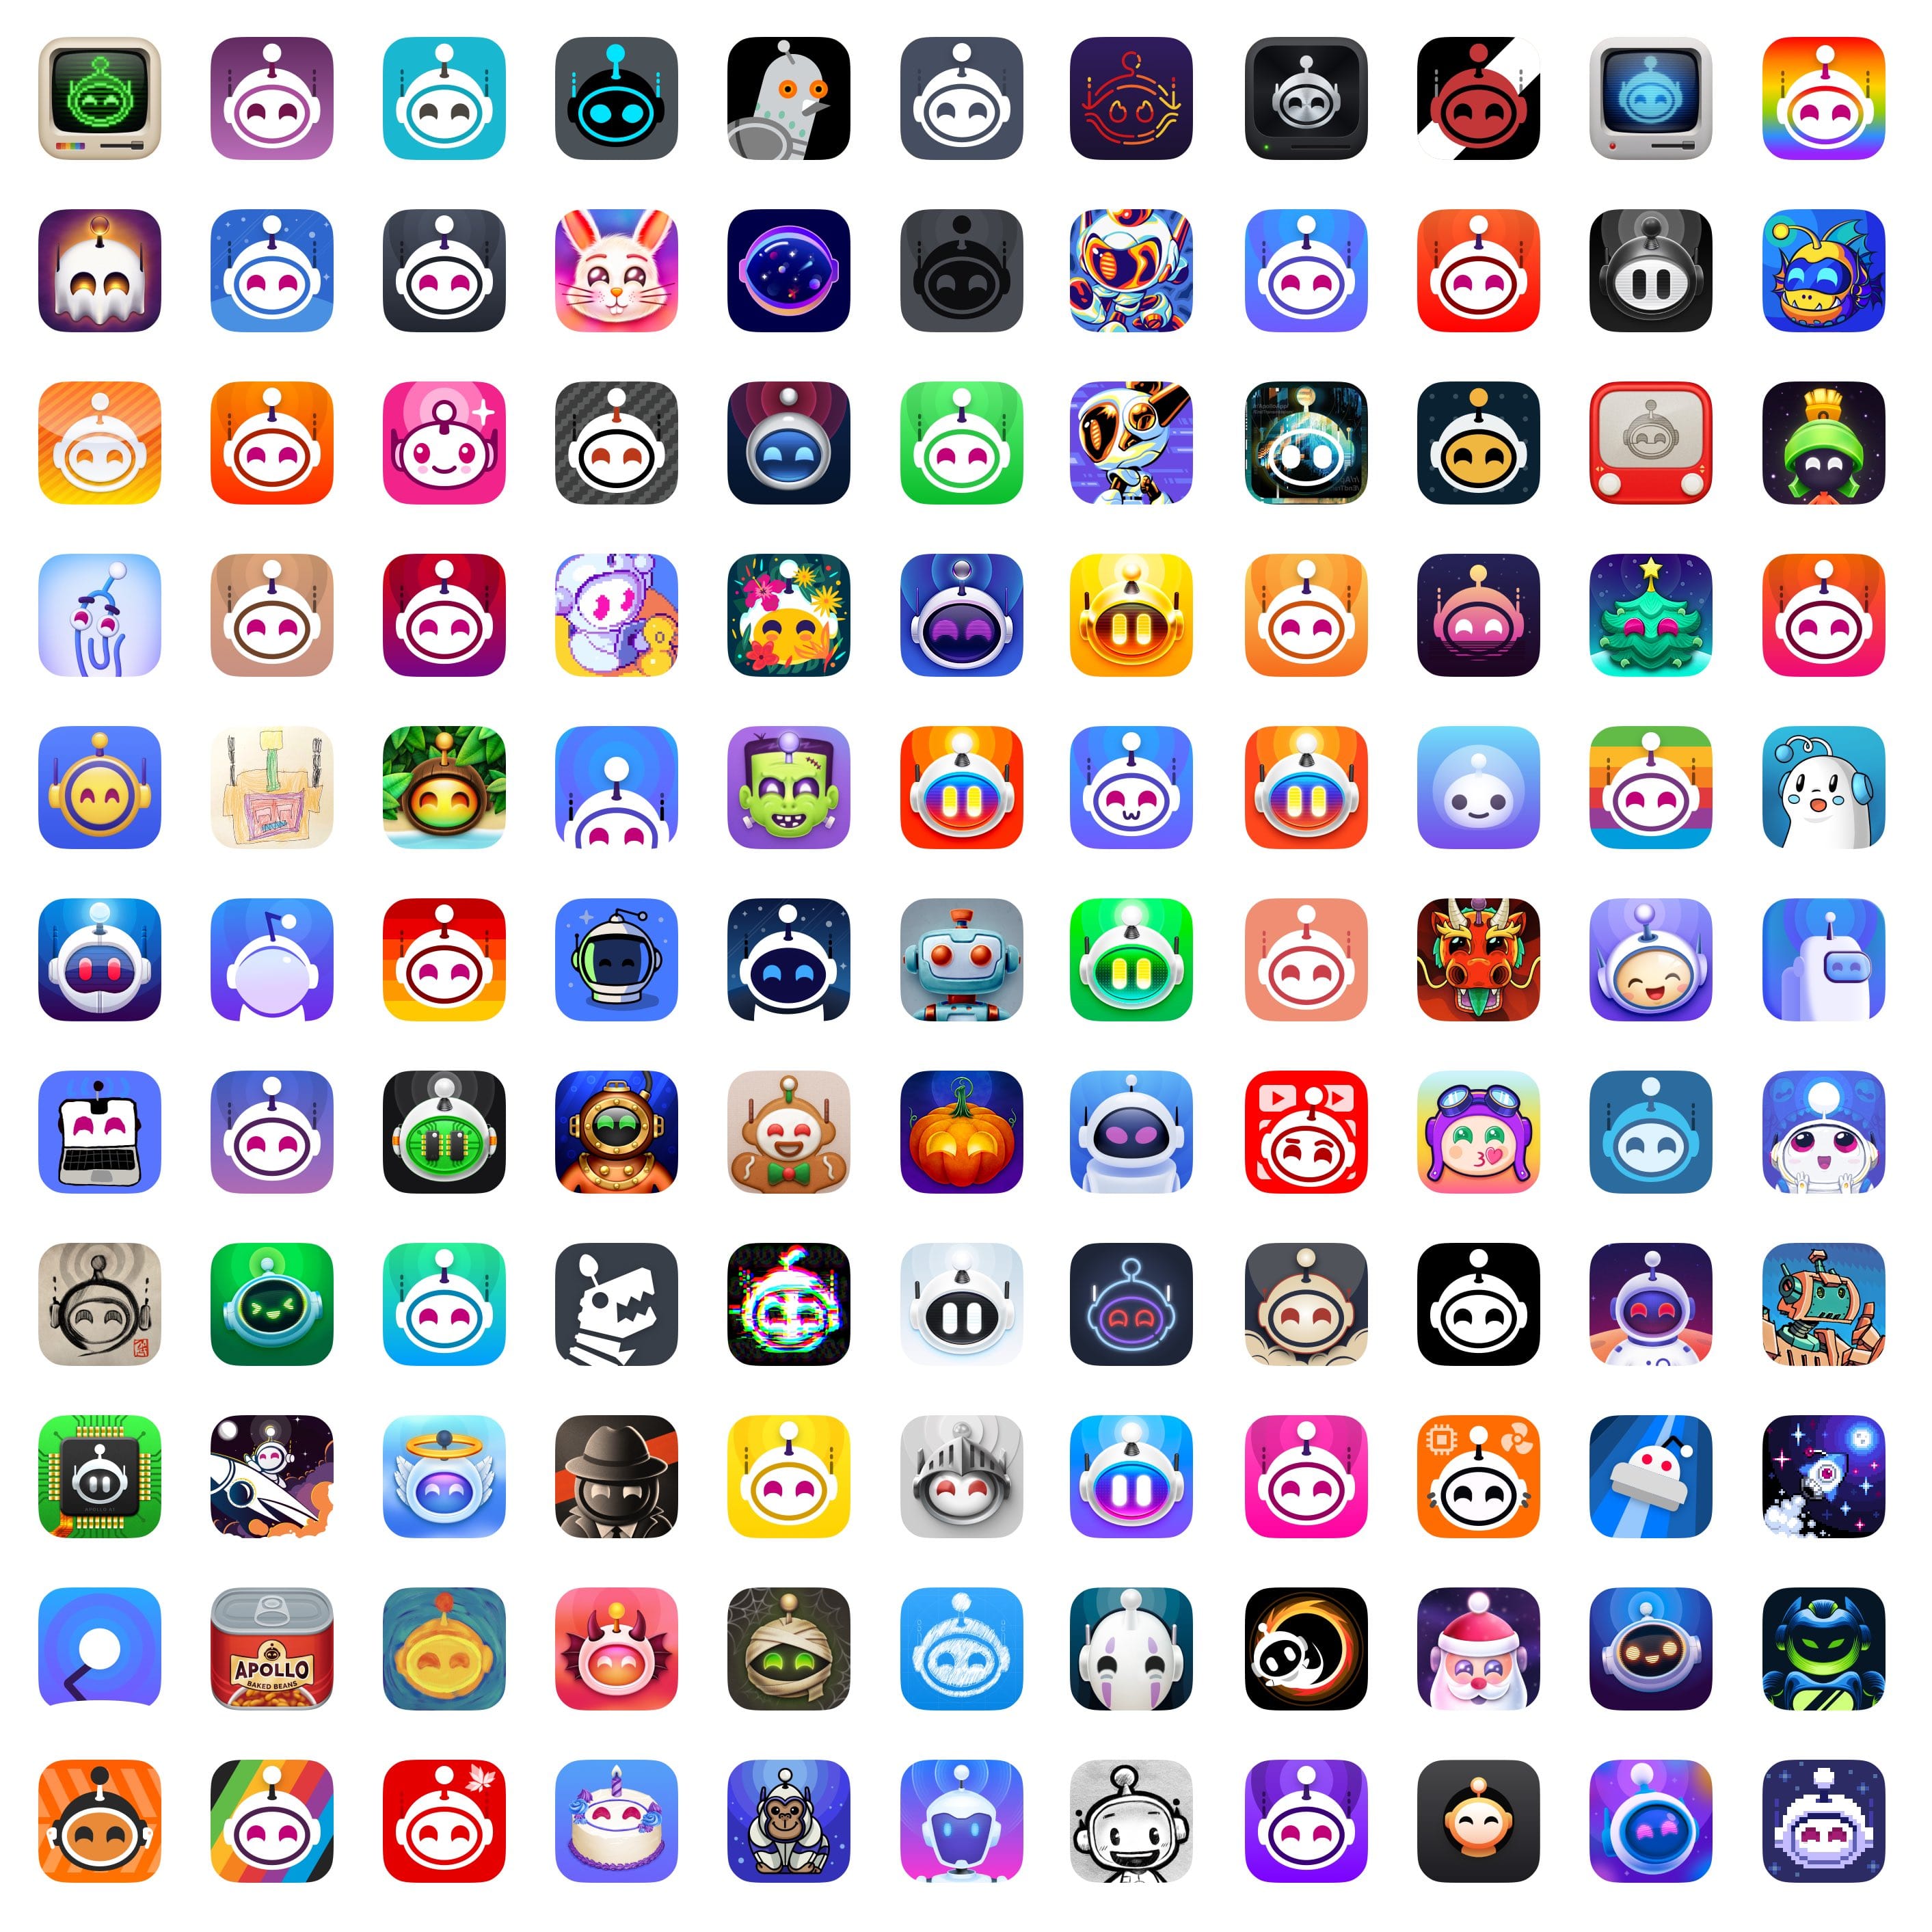 Screenshot of over 100 app icon variations for the “Apollo” app.